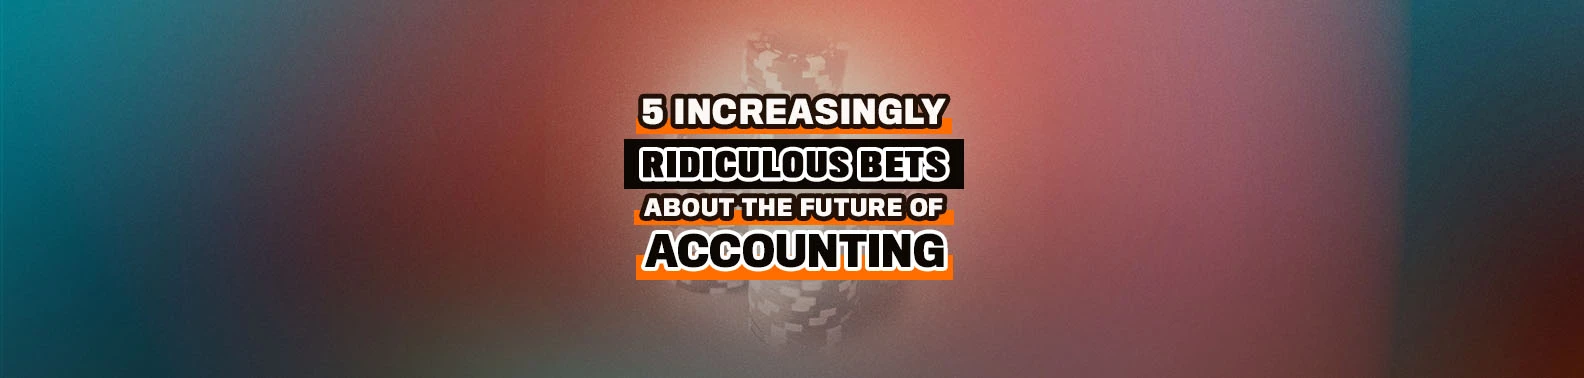 bets about the future of accounting